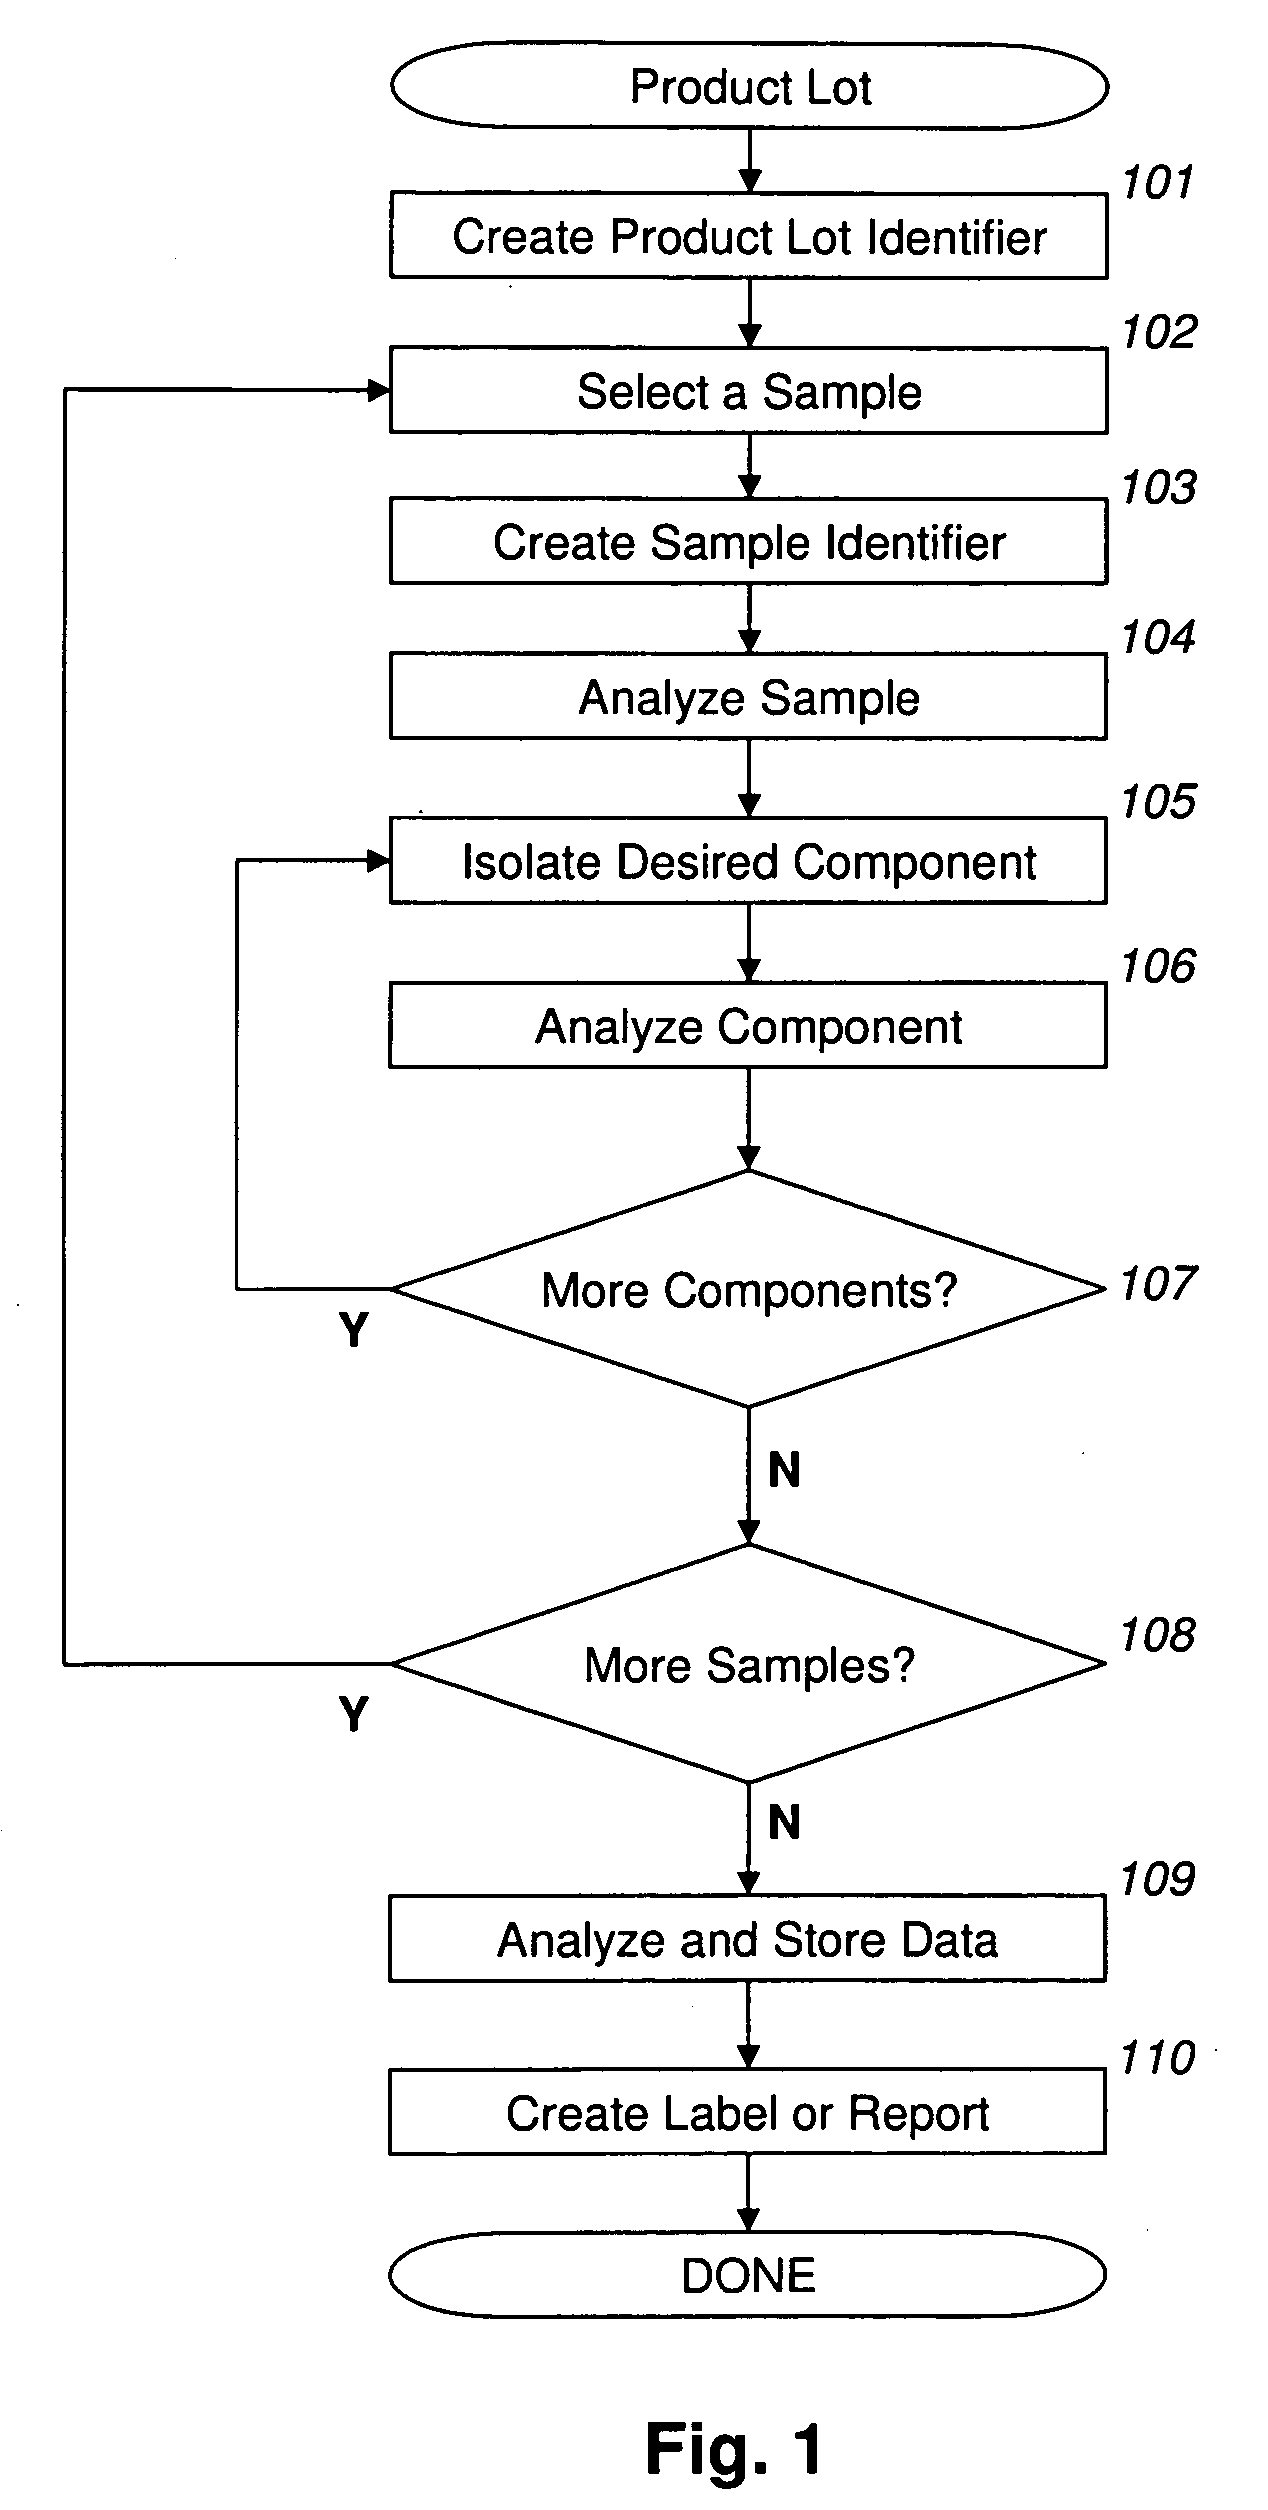 Method for analyzing, labeling and certifying low radiocarbon food products